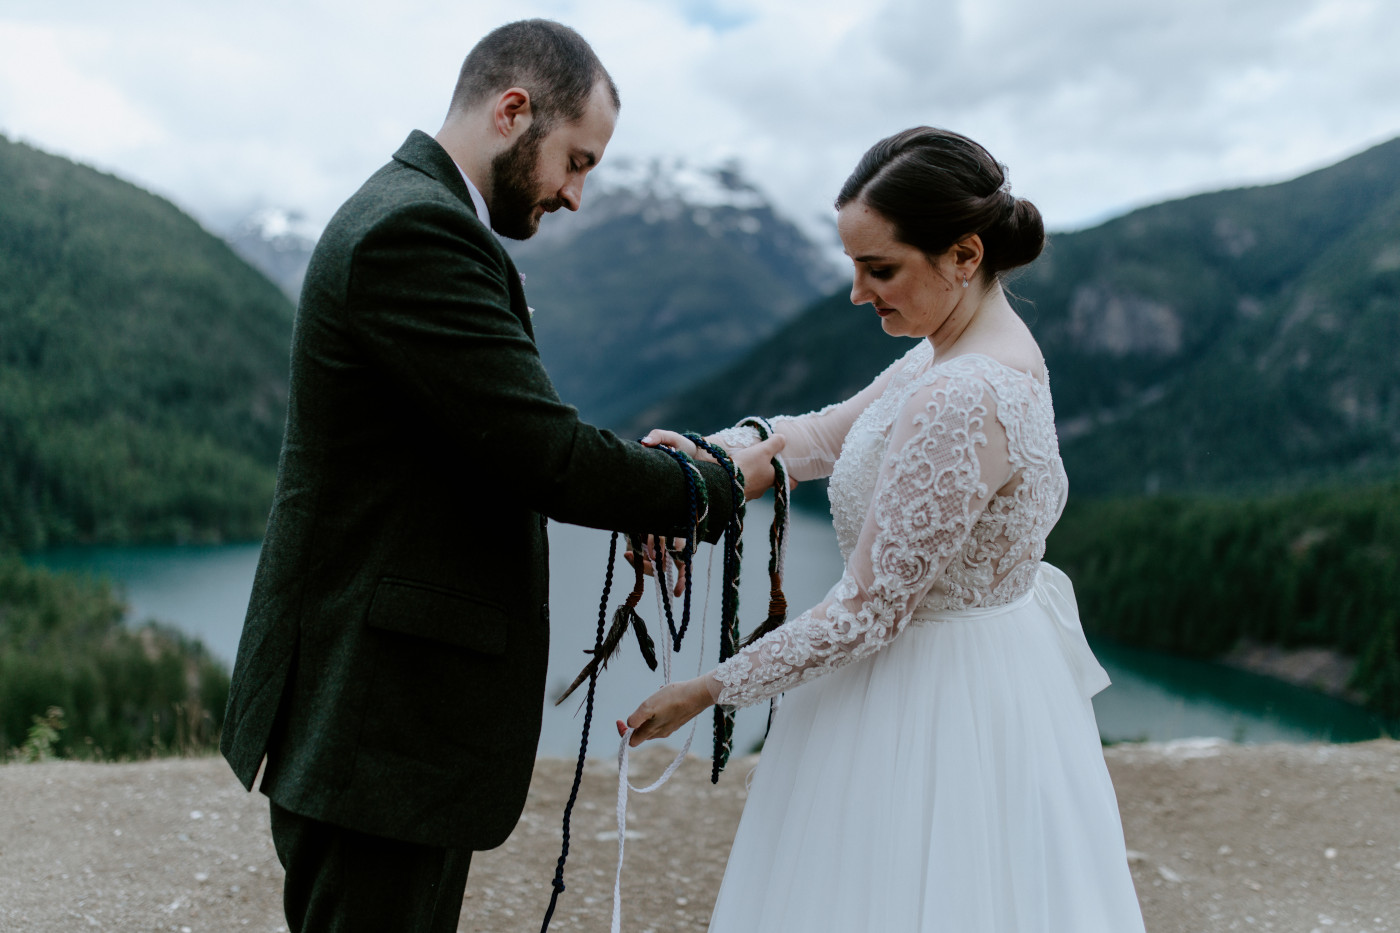 Alex and Elizabeth during their ceremony at Diablo Lake Overlook. Elopement photography at North Cascades National Park by Sienna Plus Josh.